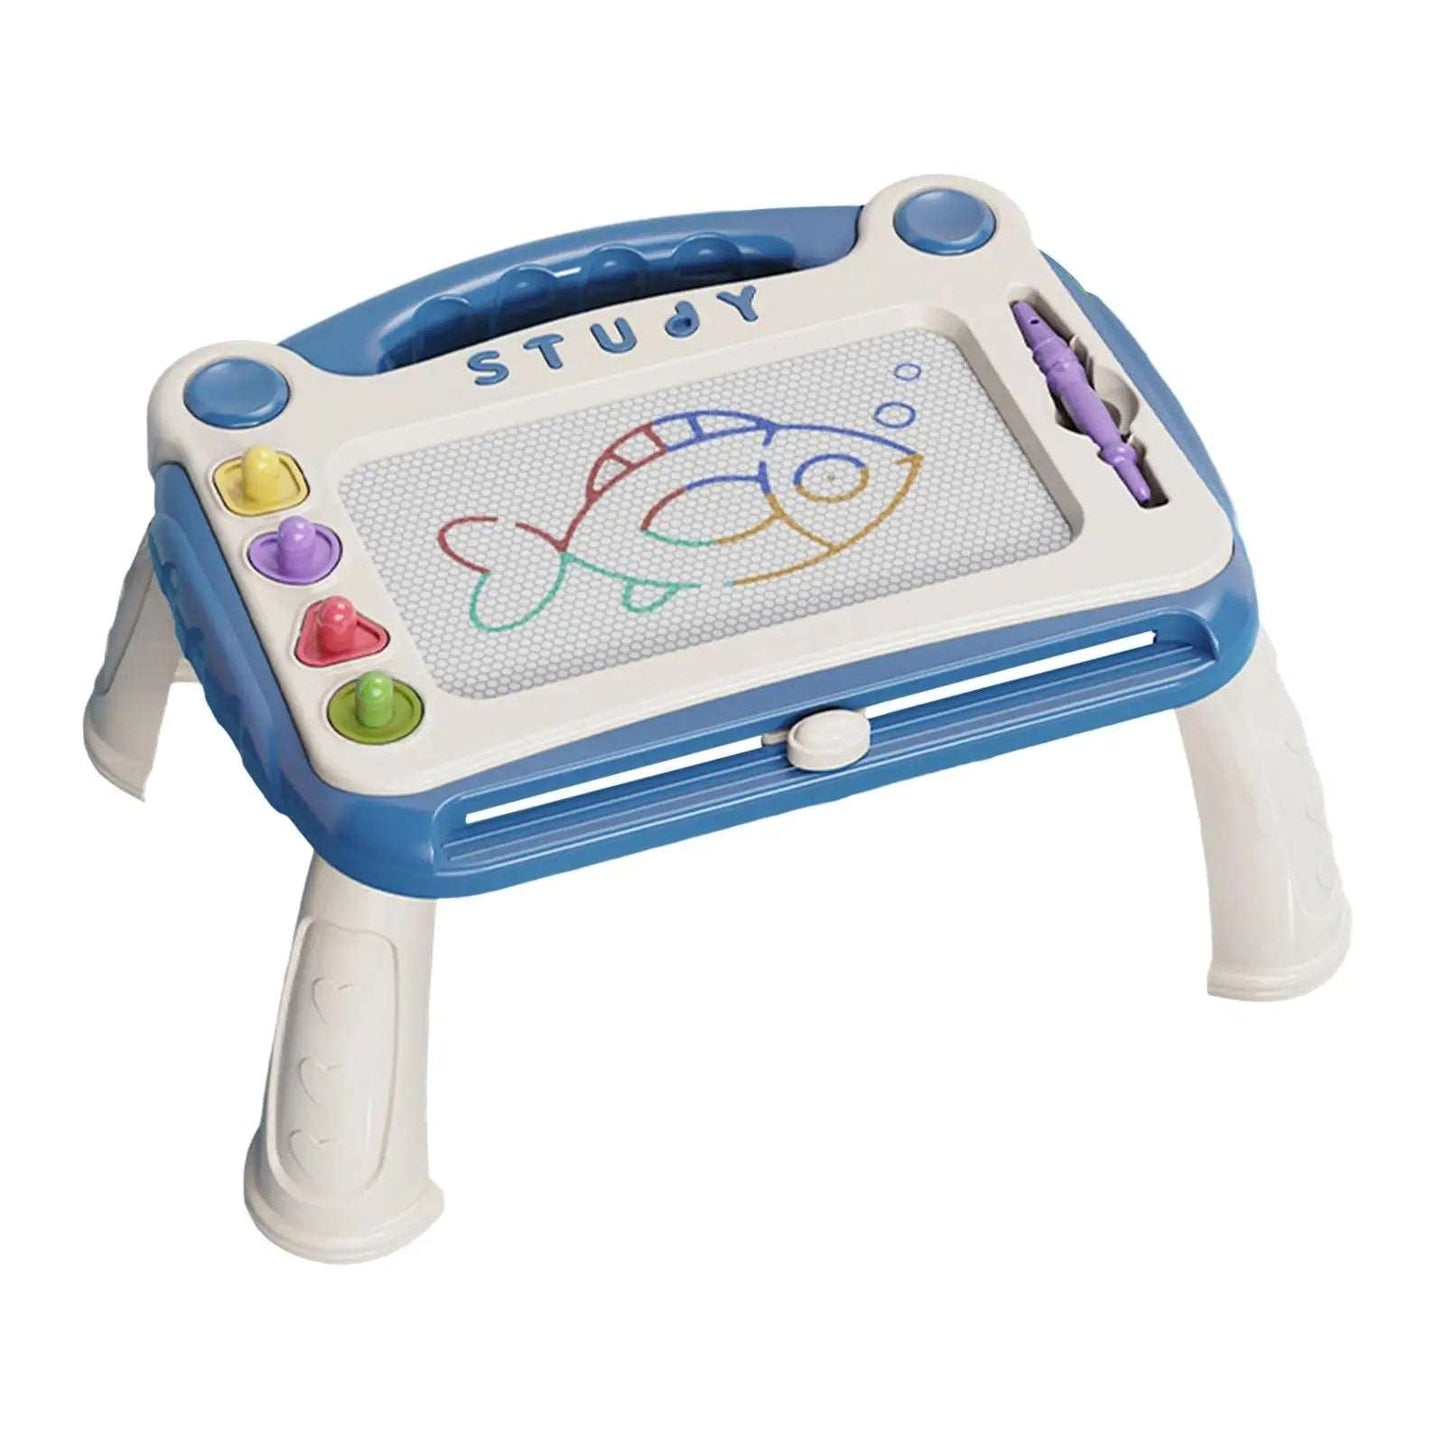 "Creative Kids' Etch Table Sketch Pad for Learning and Play" - ToylandEU